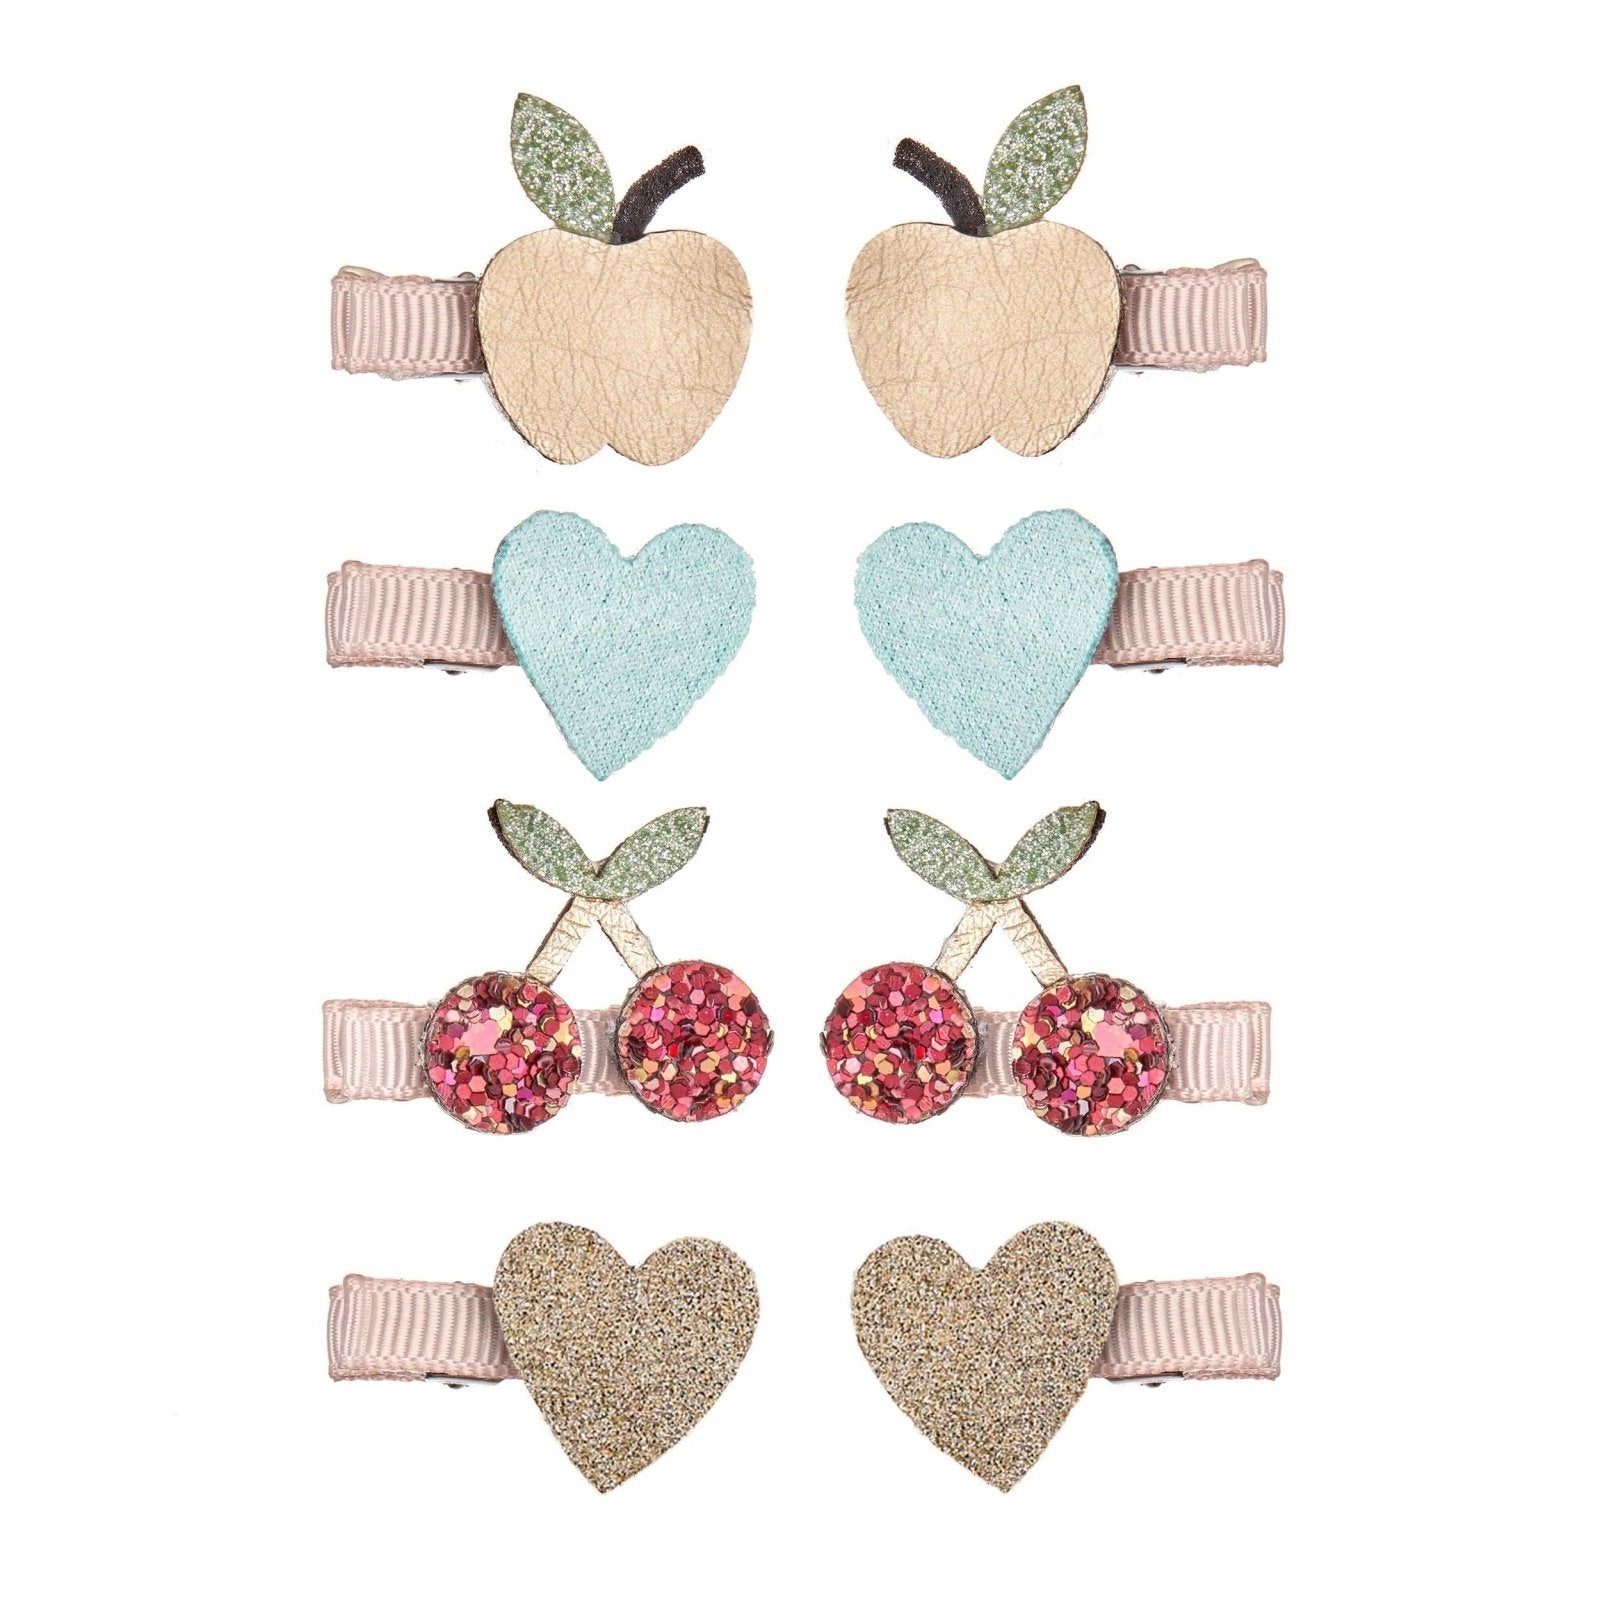 Mini Orchard Clips find Stylish Fashion for Little People- at Little Foxx Concept Store